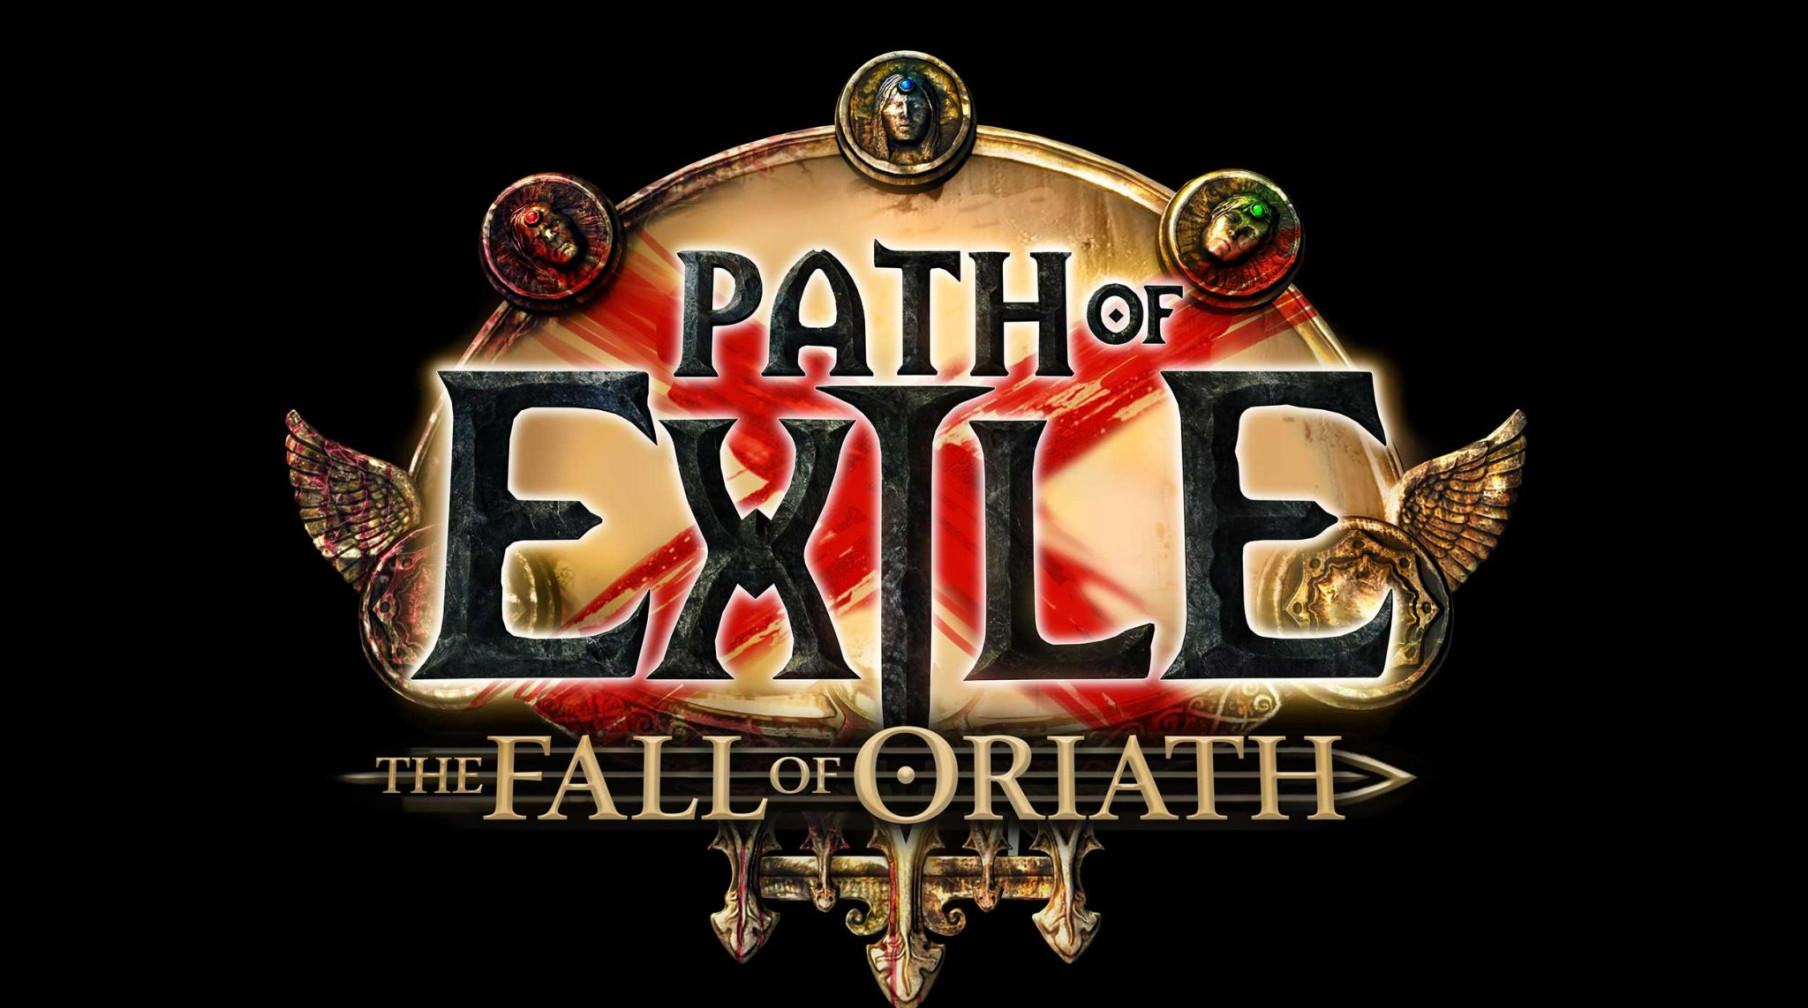 Path of exile not steam фото 100